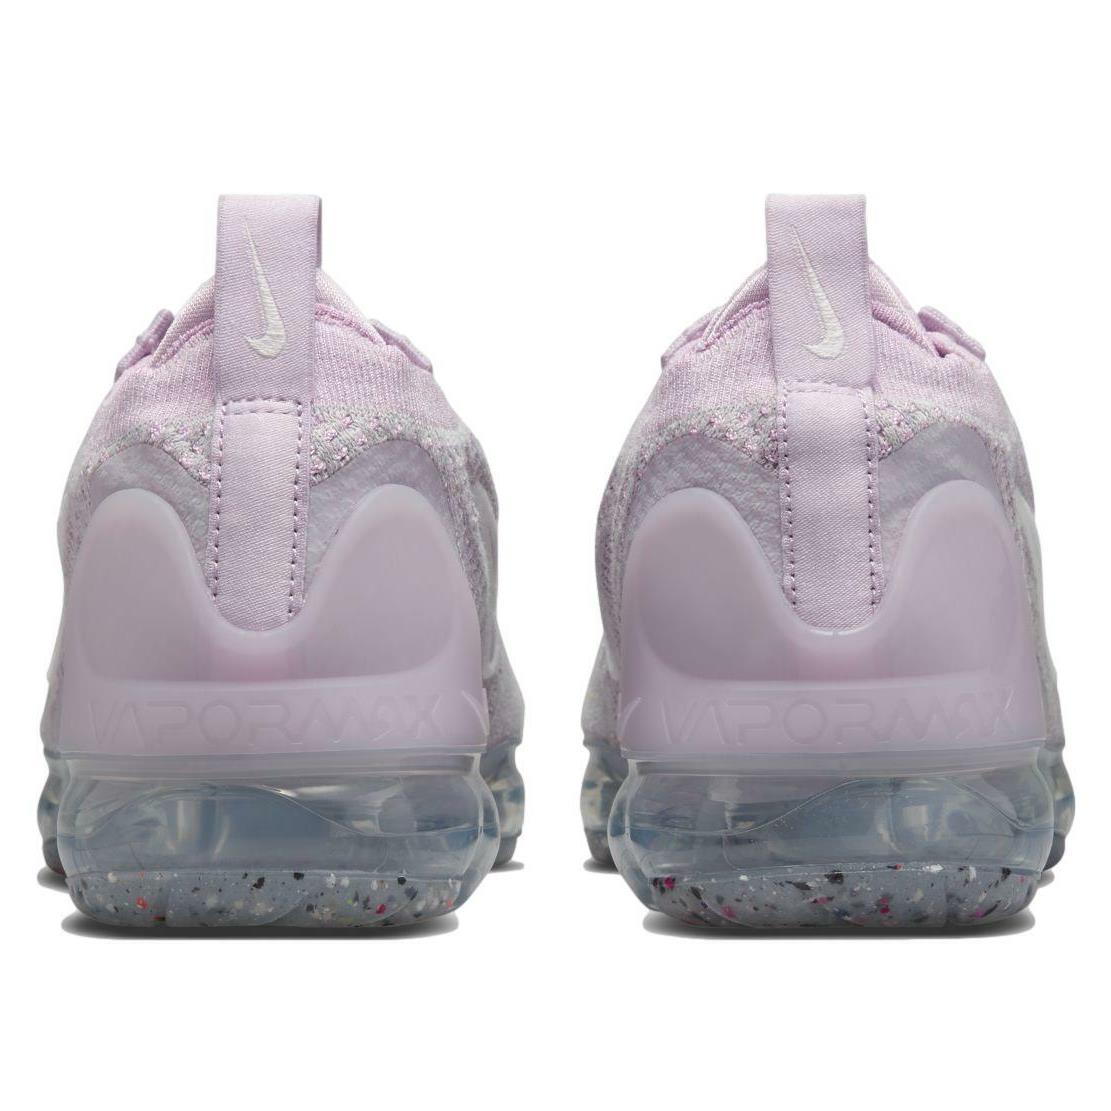 Nike shoes Air Vapormax Flyknit - Light Arctic Pink/Iced Lilac 4